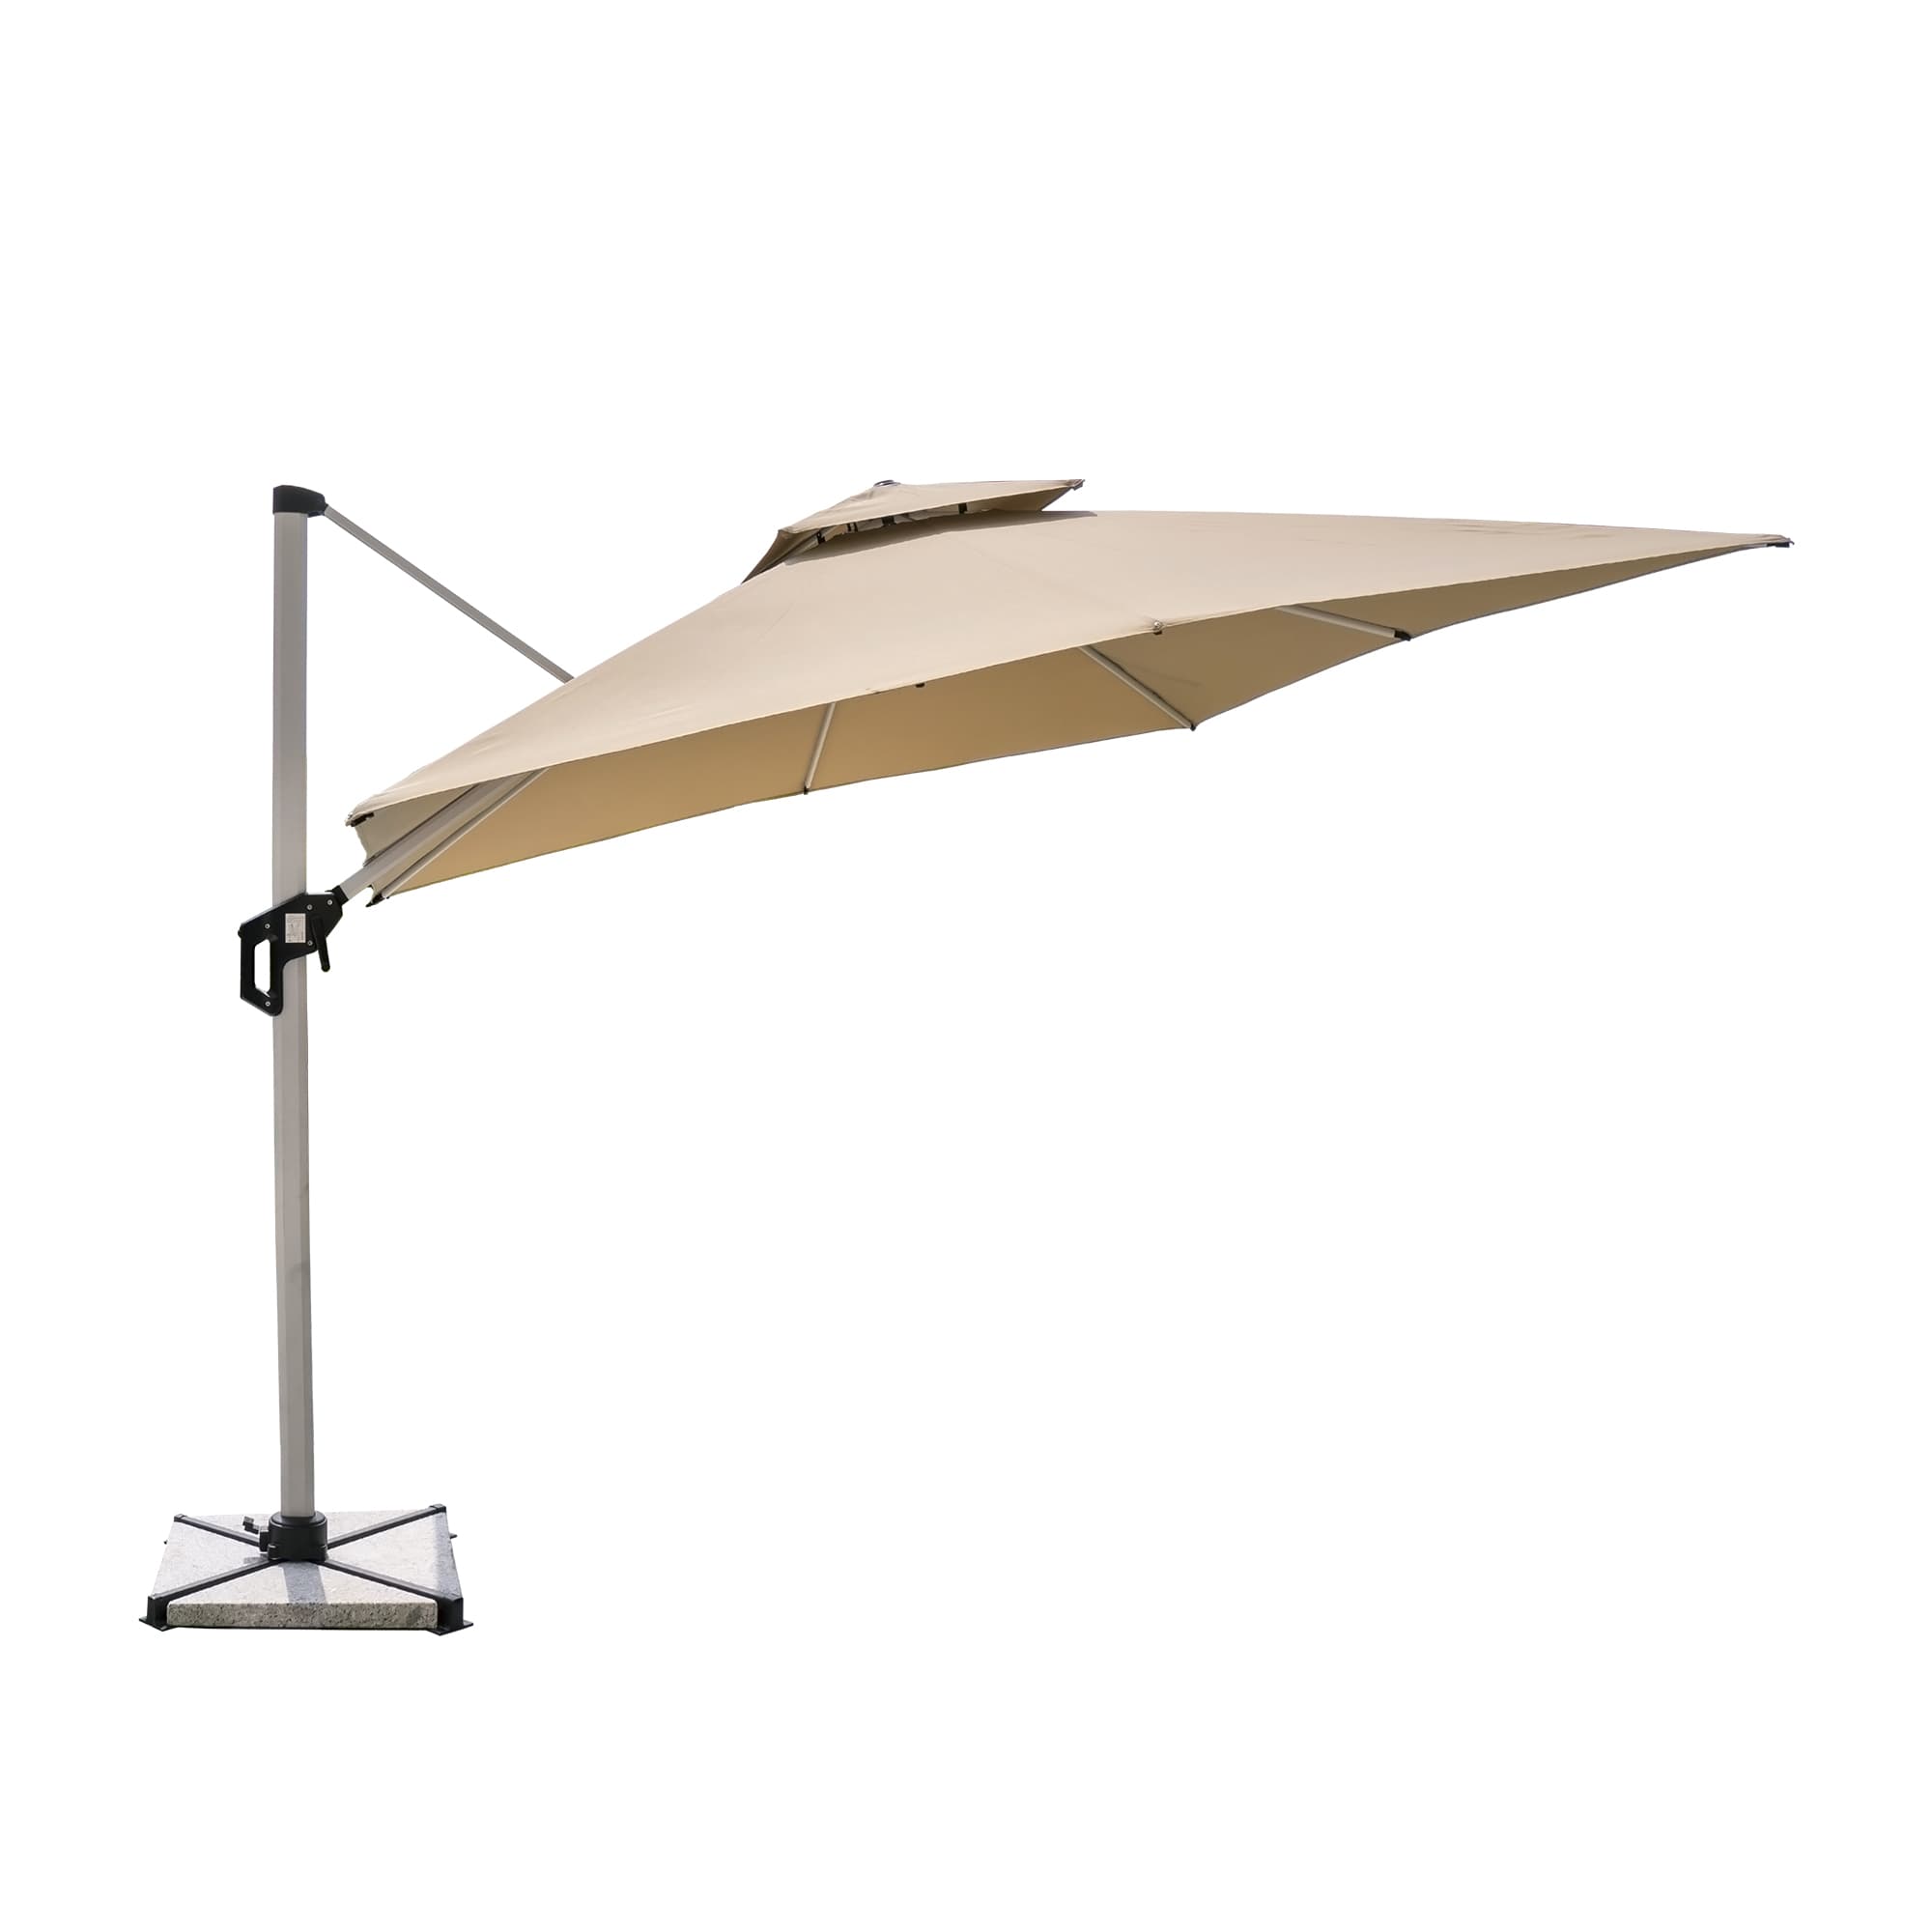 Olilawn 11' x 11' Honolulu Square Cantilever Umbrella with Double Top